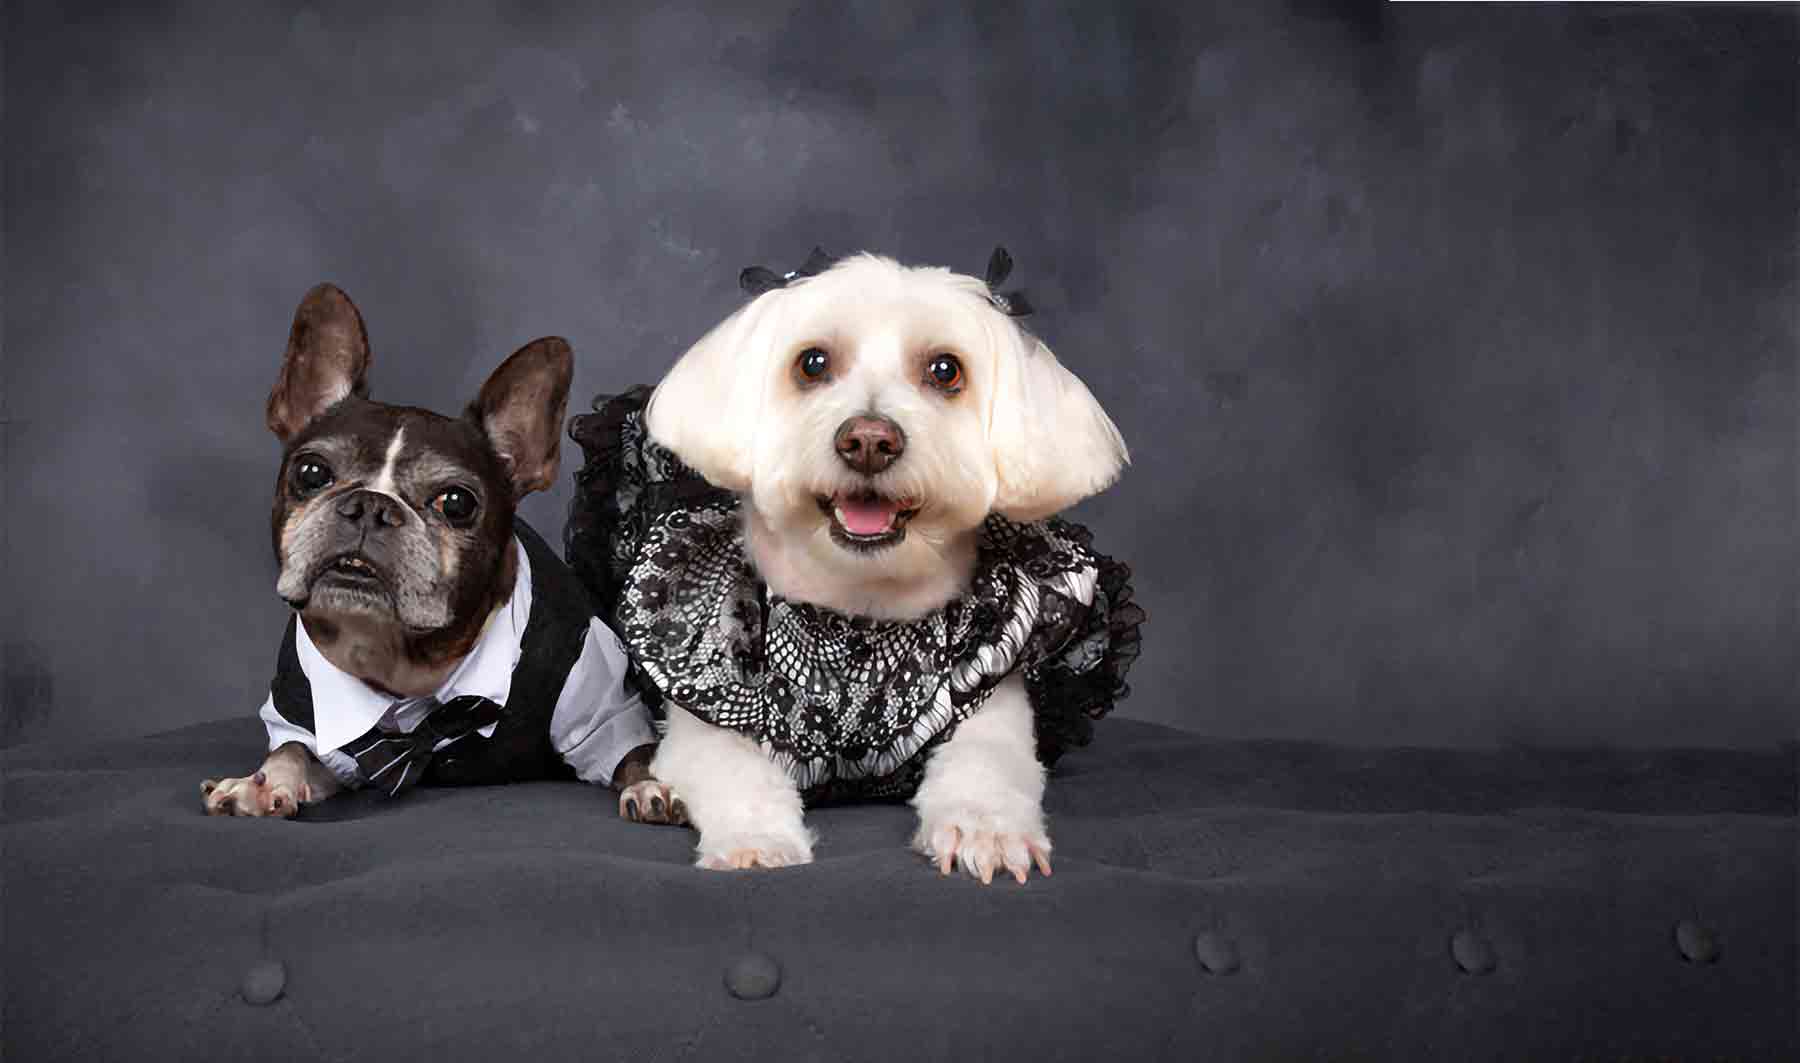 Meet our amazing pups Willow (Bichon Frise, Maltese and Havanese mix wearing our Elegant Black Lace Designer Dog Dress) and Dilla (French Bulldog and Boston Terrier mix wearing our 3-Piece Suit for Dogs). 